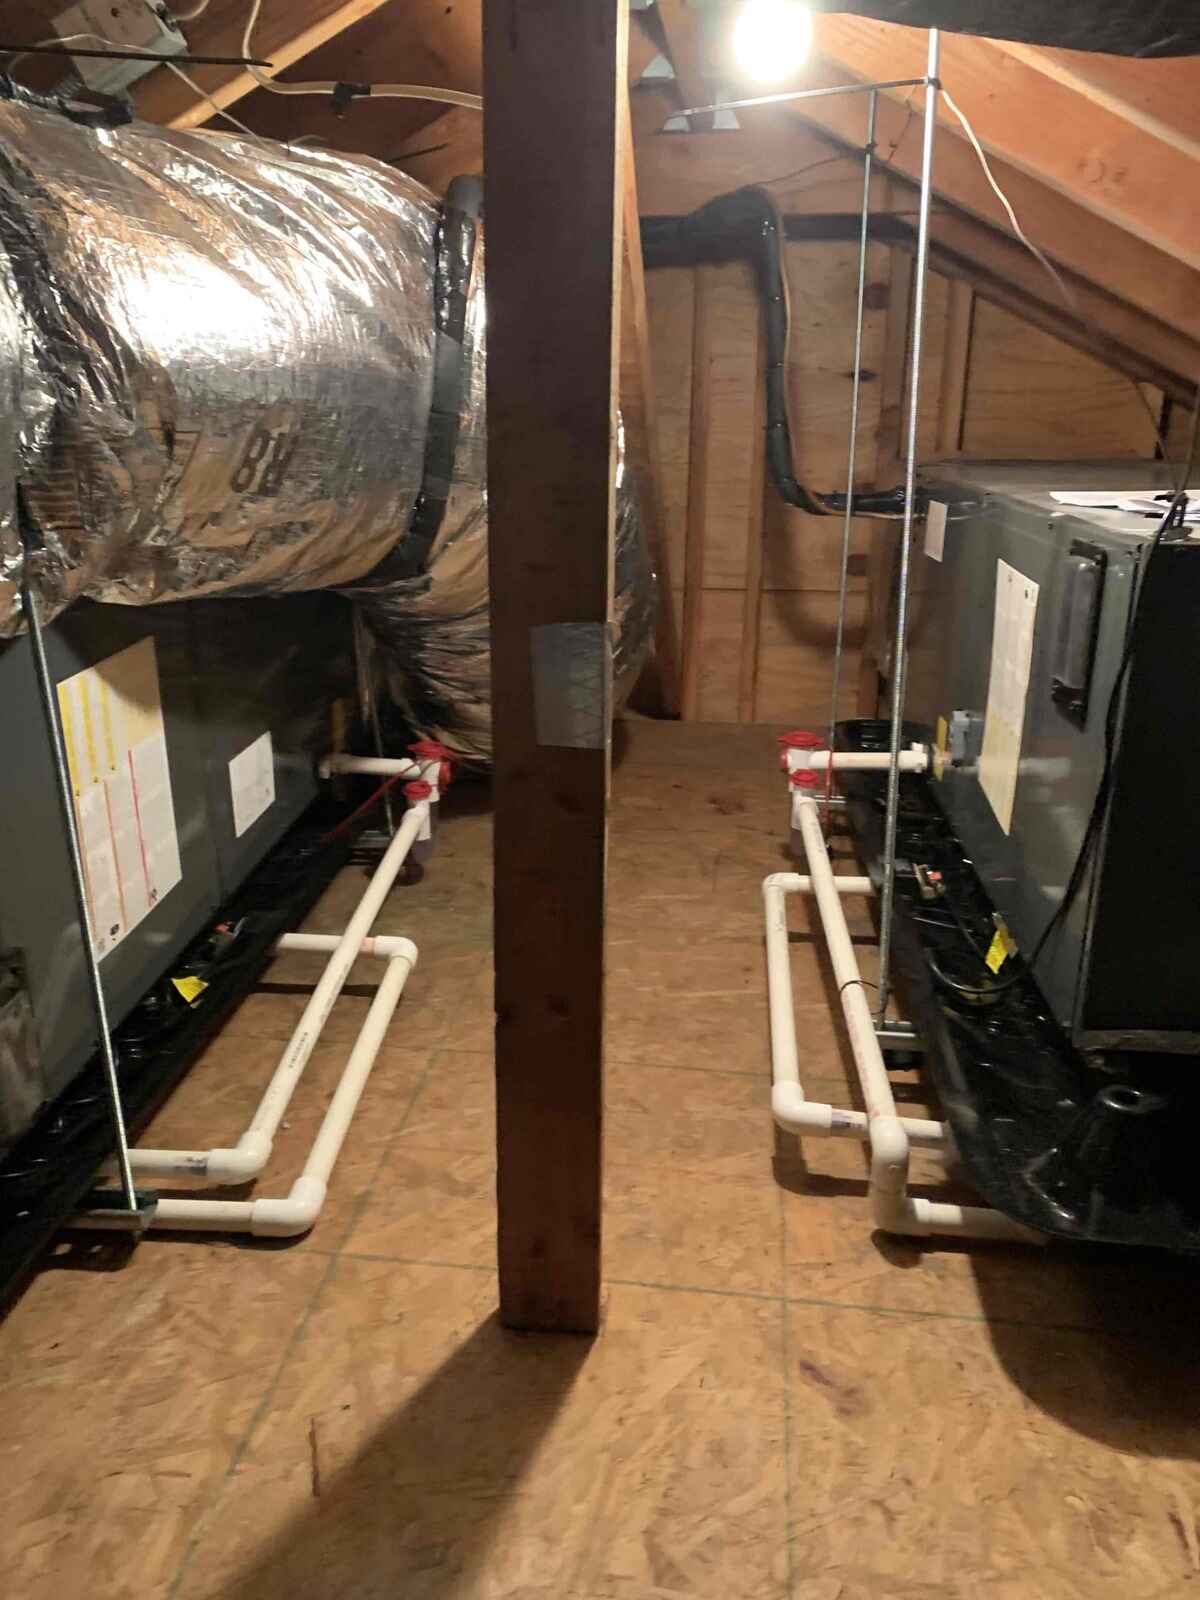 New air handler system in an attic